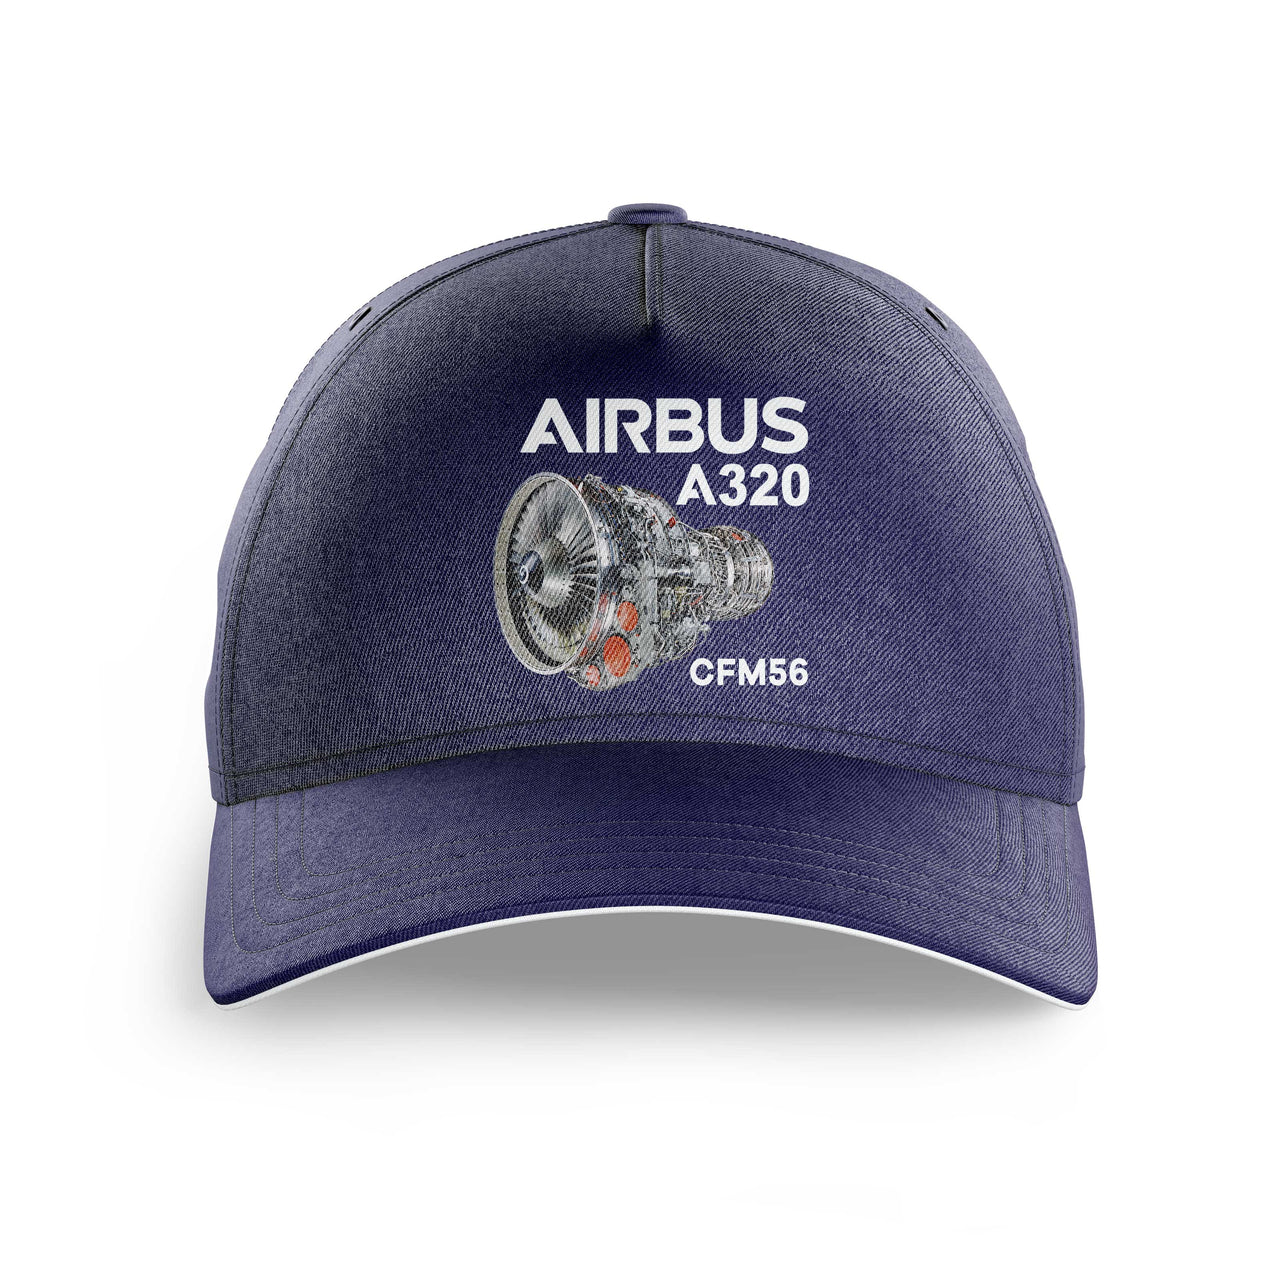 Airbus A320 & CFM56 Engine Printed Hats